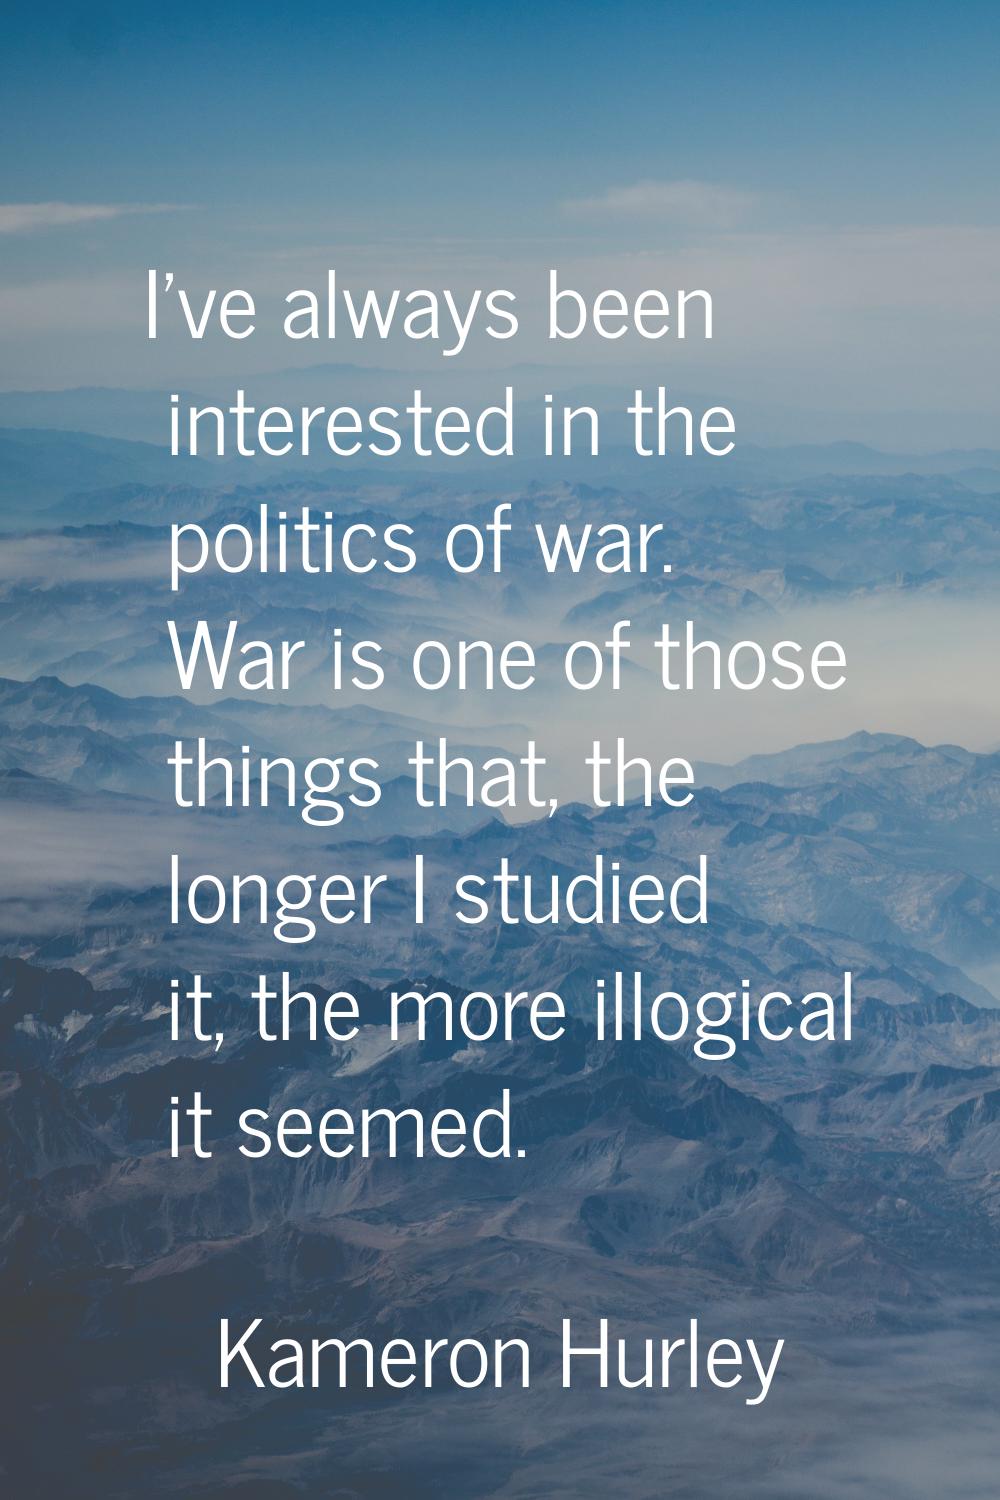 I've always been interested in the politics of war. War is one of those things that, the longer I s